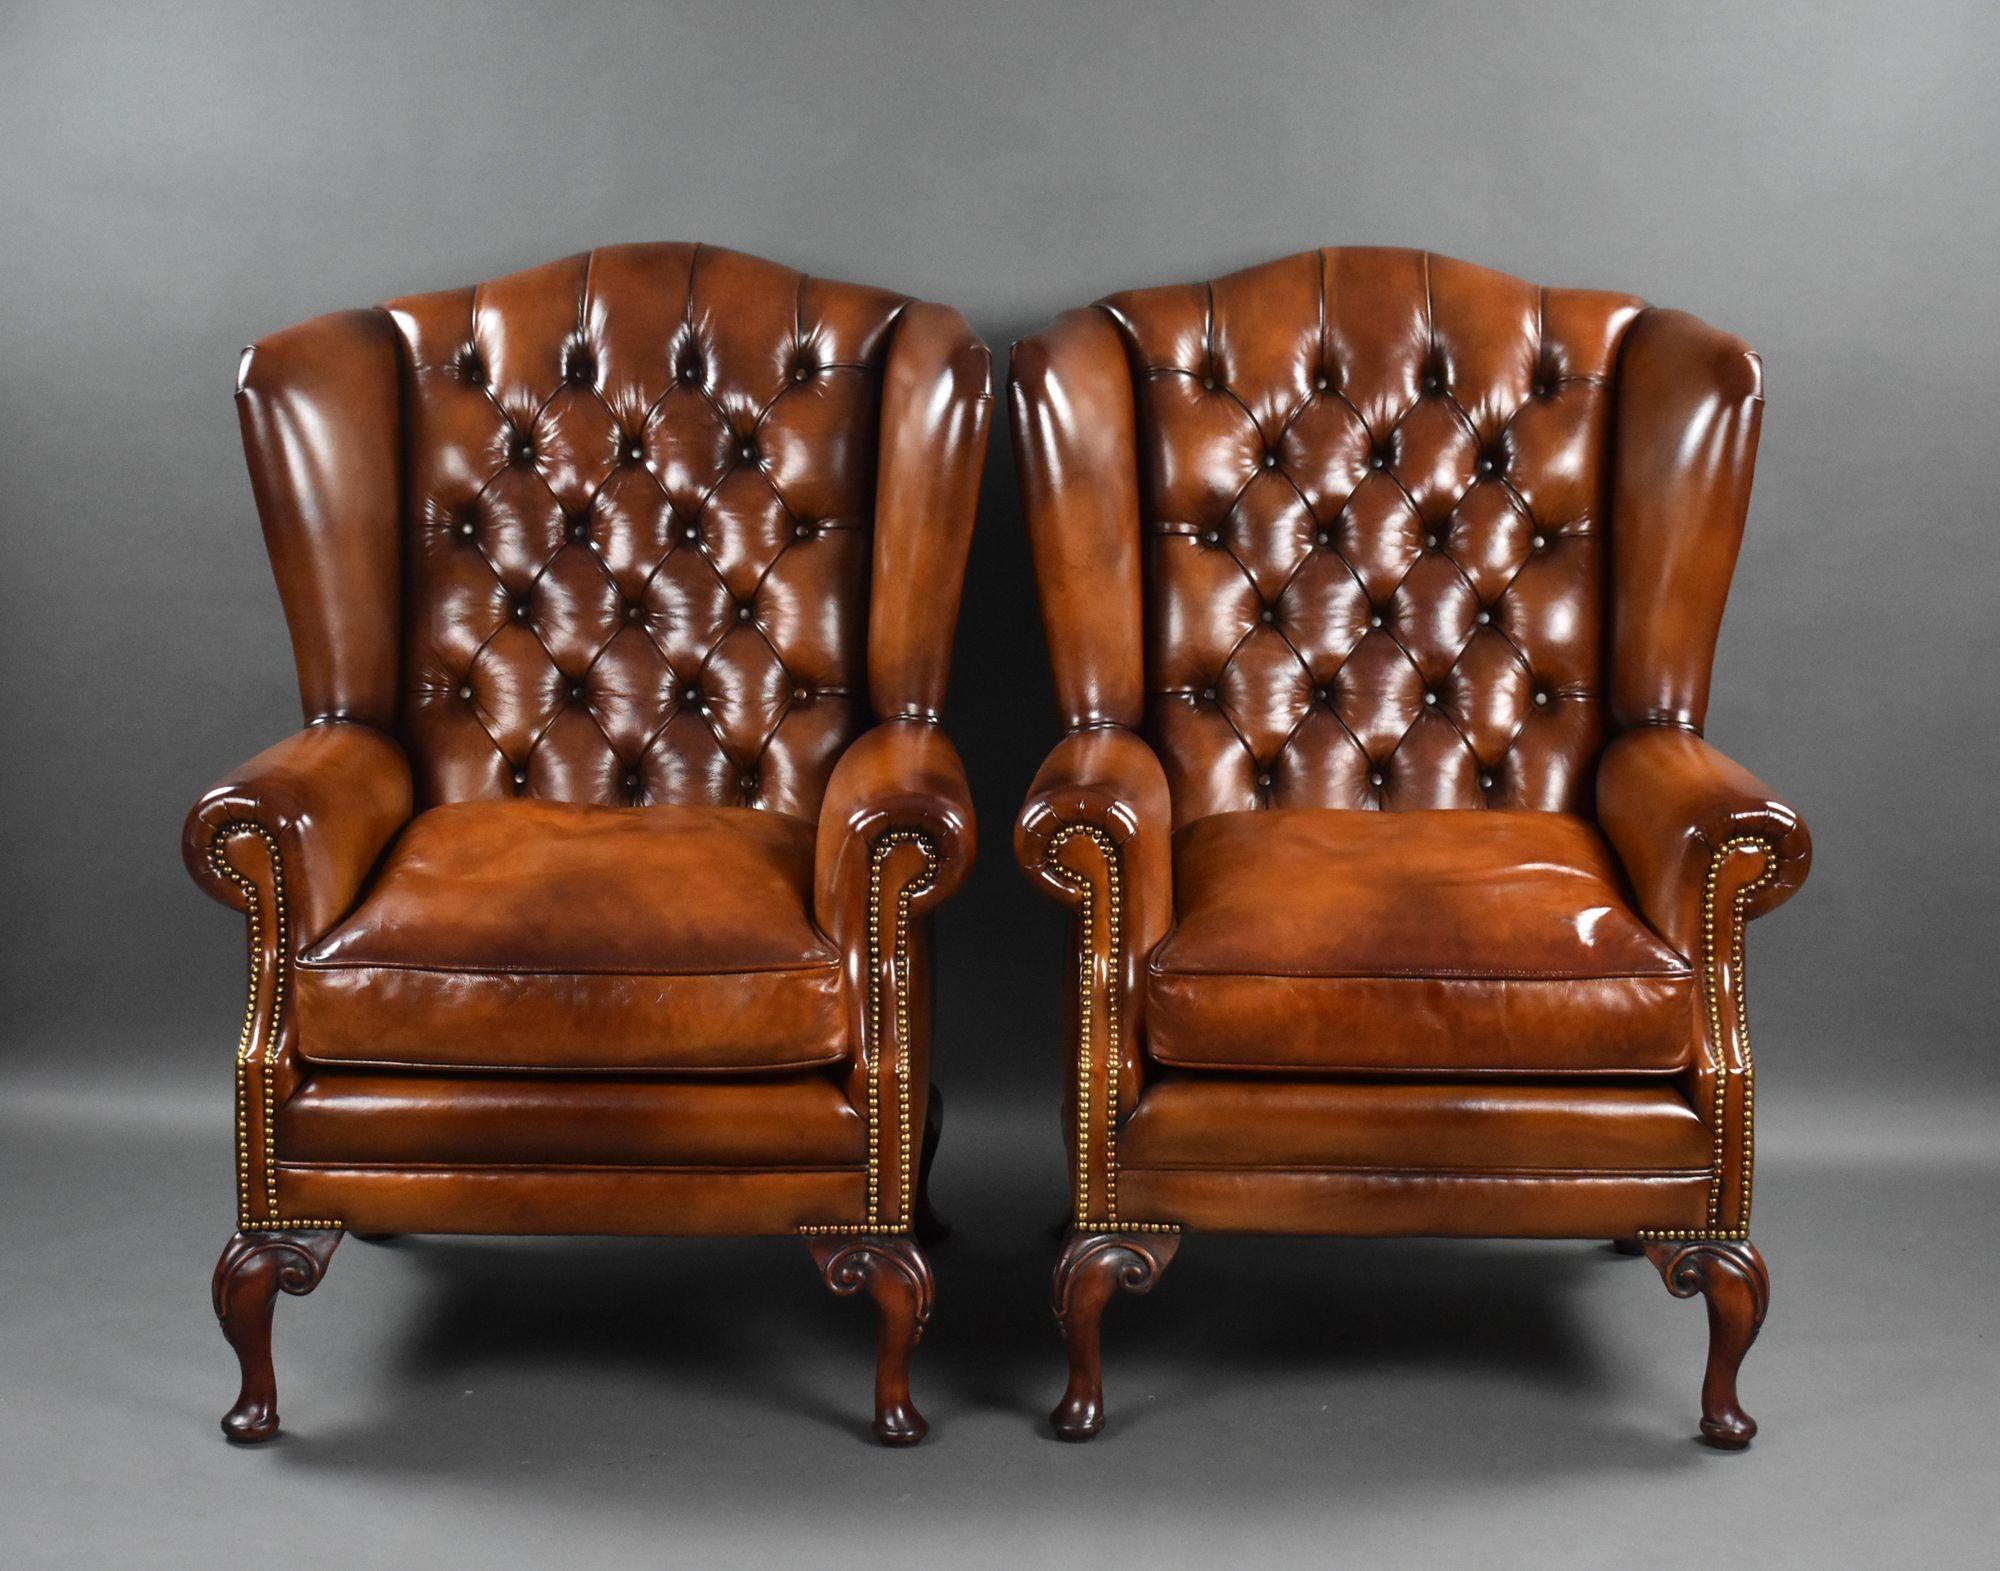 For sale is a good quality pair of antique hand dyed leather wing back armchairs, each with deep buttoned backs and feather stuffed seats, the chairs stand on elegant cabriole legs to the front, and fine legs to the rear. Each chair is in excellent